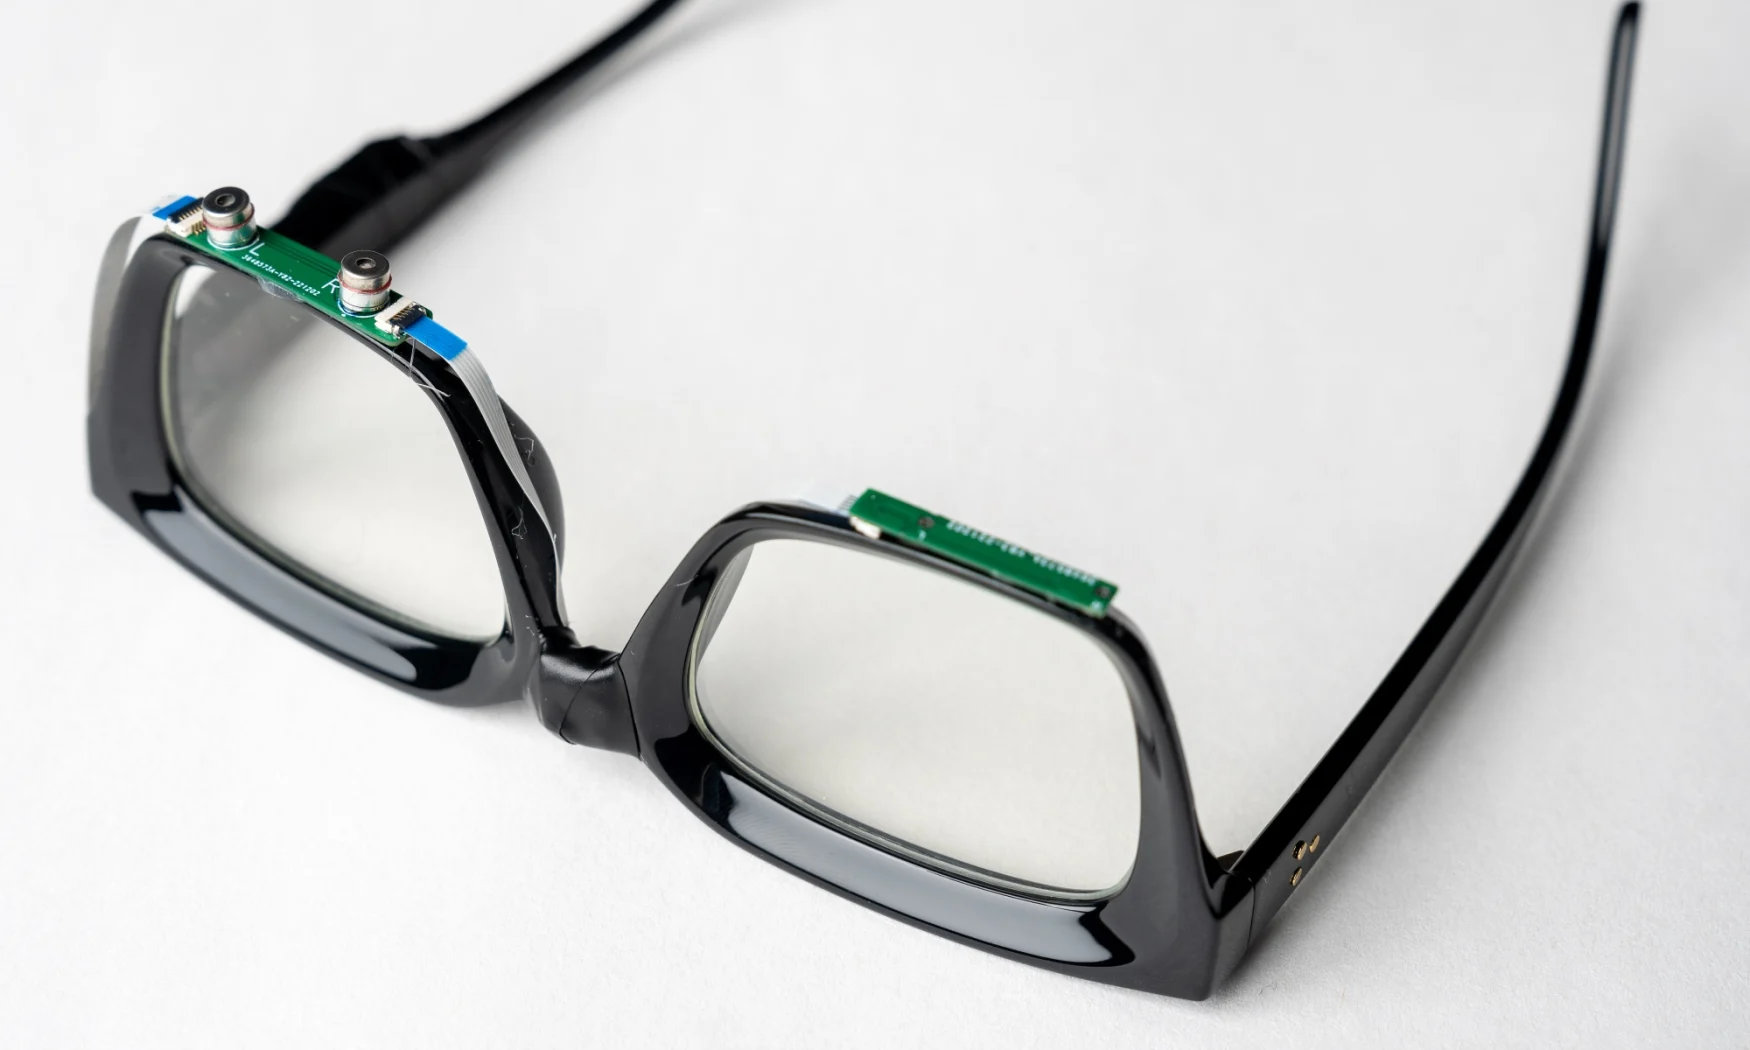 A pair of black-plastic-framed eyeglasses sitting upside down on a white surface. The frames have small circuit boards with tiny speakers and microphones attached below the lenses.